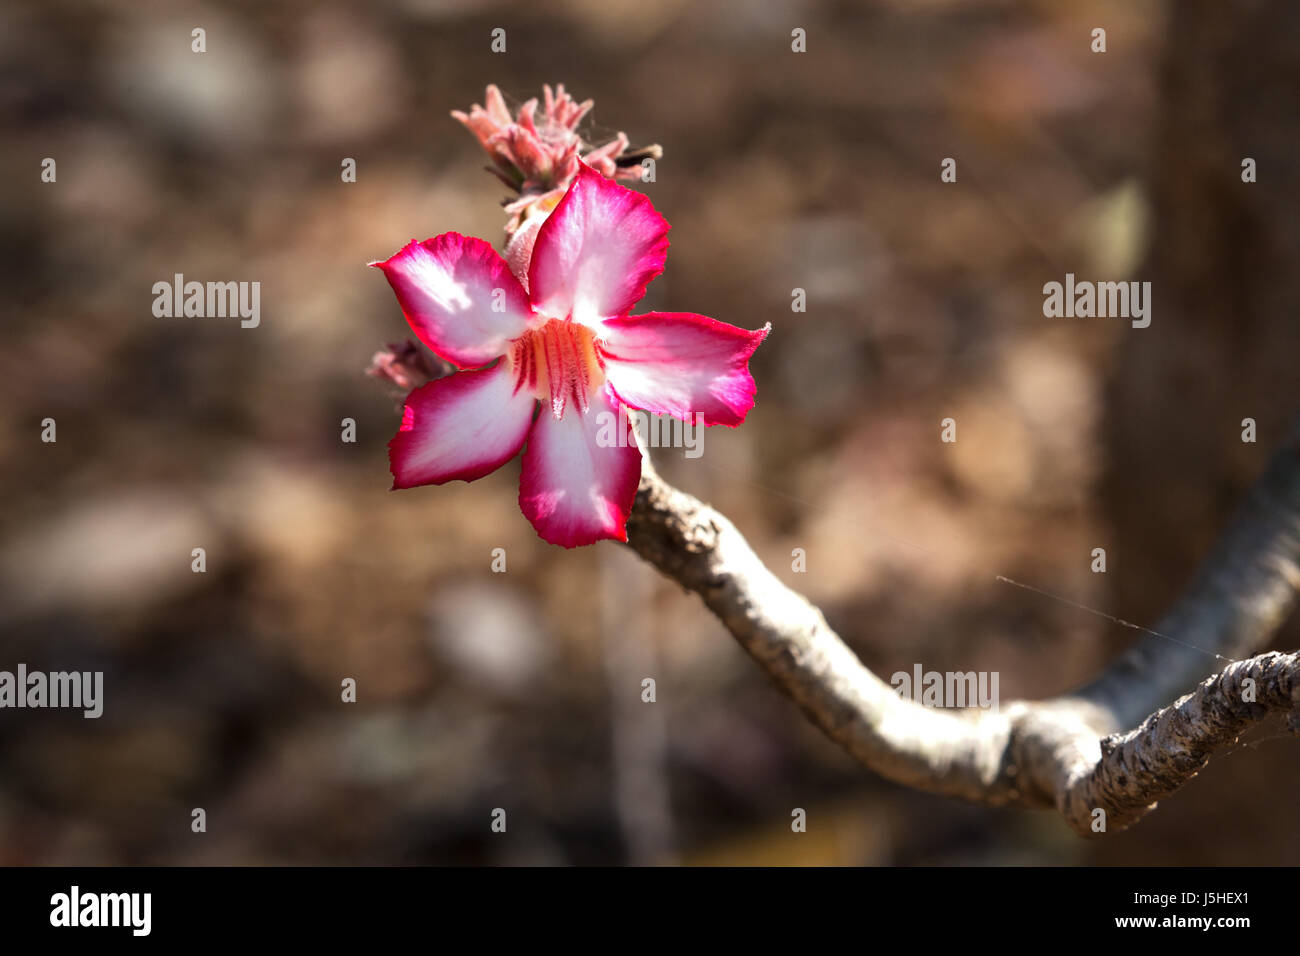 Impala lily with white and red colours at a photo safari Stock Photo